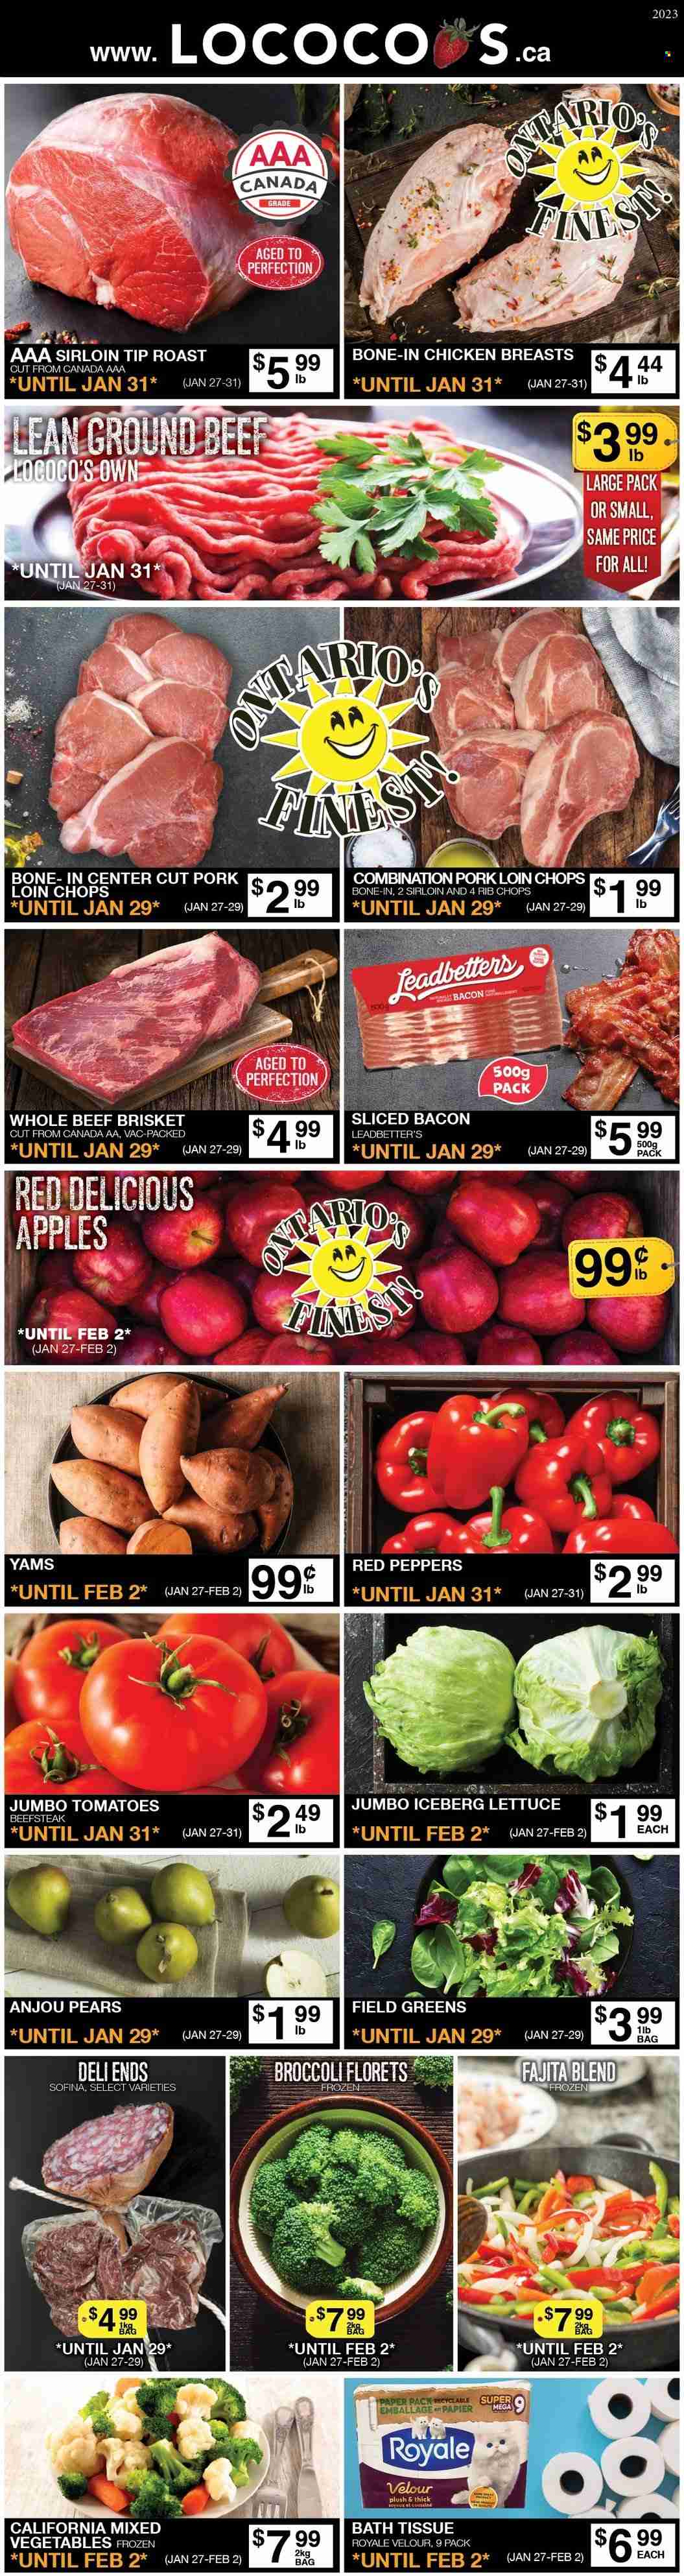 thumbnail - Lococo's Flyer - January 27, 2023 - February 02, 2023 - Sales products - broccoli, tomatoes, lettuce, peppers, red peppers, apples, Red Delicious apples, pears, chicken breasts, beef meat, ground beef, beef brisket, pork chops, pork loin, pork meat, rib chops, fajita mix, bacon, mixed vegetables. Page 1.